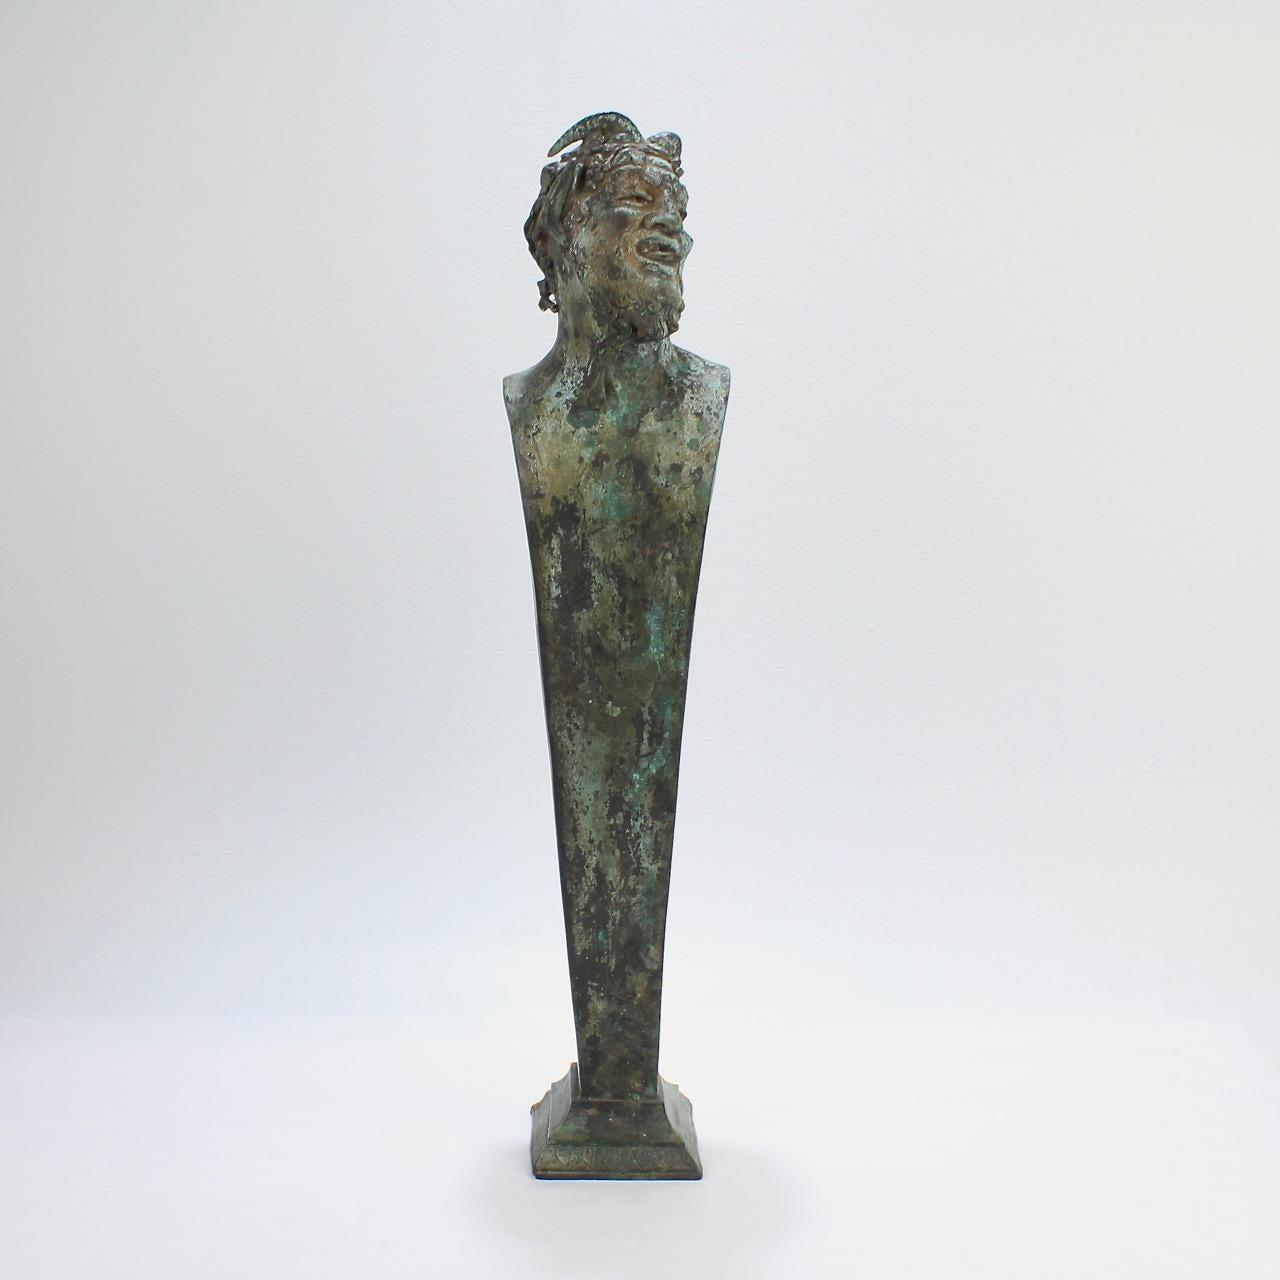 A wonderful Grand Tour period bronze Herm after an ancient model.

Depicting Bacchus (or possibly a Faun).

Having an exceptional weathered, verdigris patina. 

The bronze was found in a Pennsylvania estate and was (by repute) periodically kept